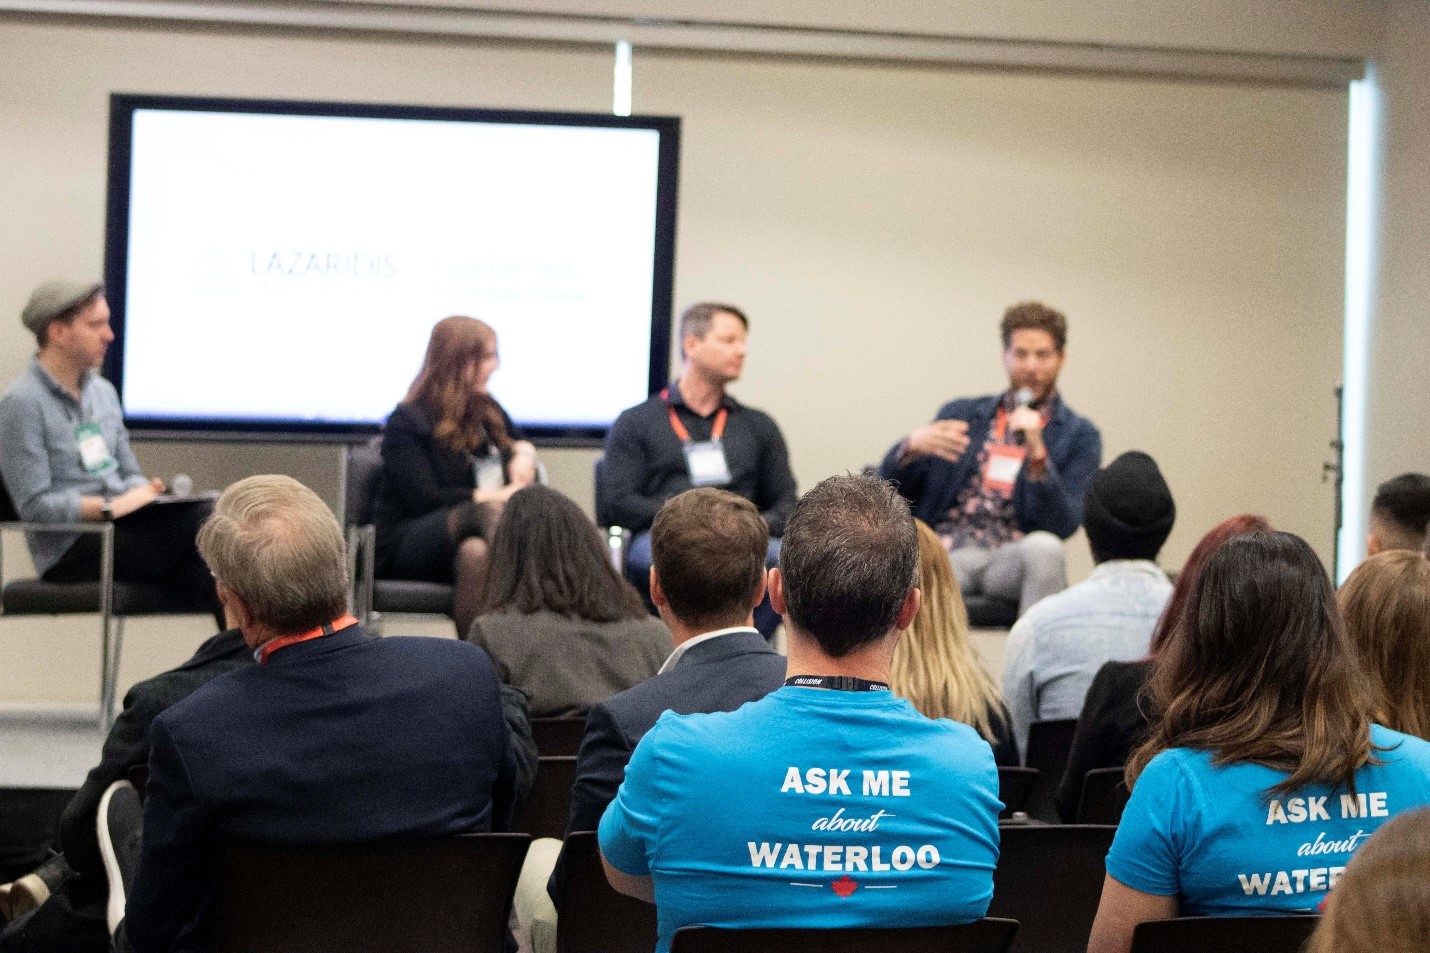 Members of the Waterloo EDC team look on as Waterloo Region business leaders participate in a panel discussion on scaling a tech company at the Collision Conference in May 2019. Waterloo EDC planned and co-ordinated the panel with the Lazaridis Institute.